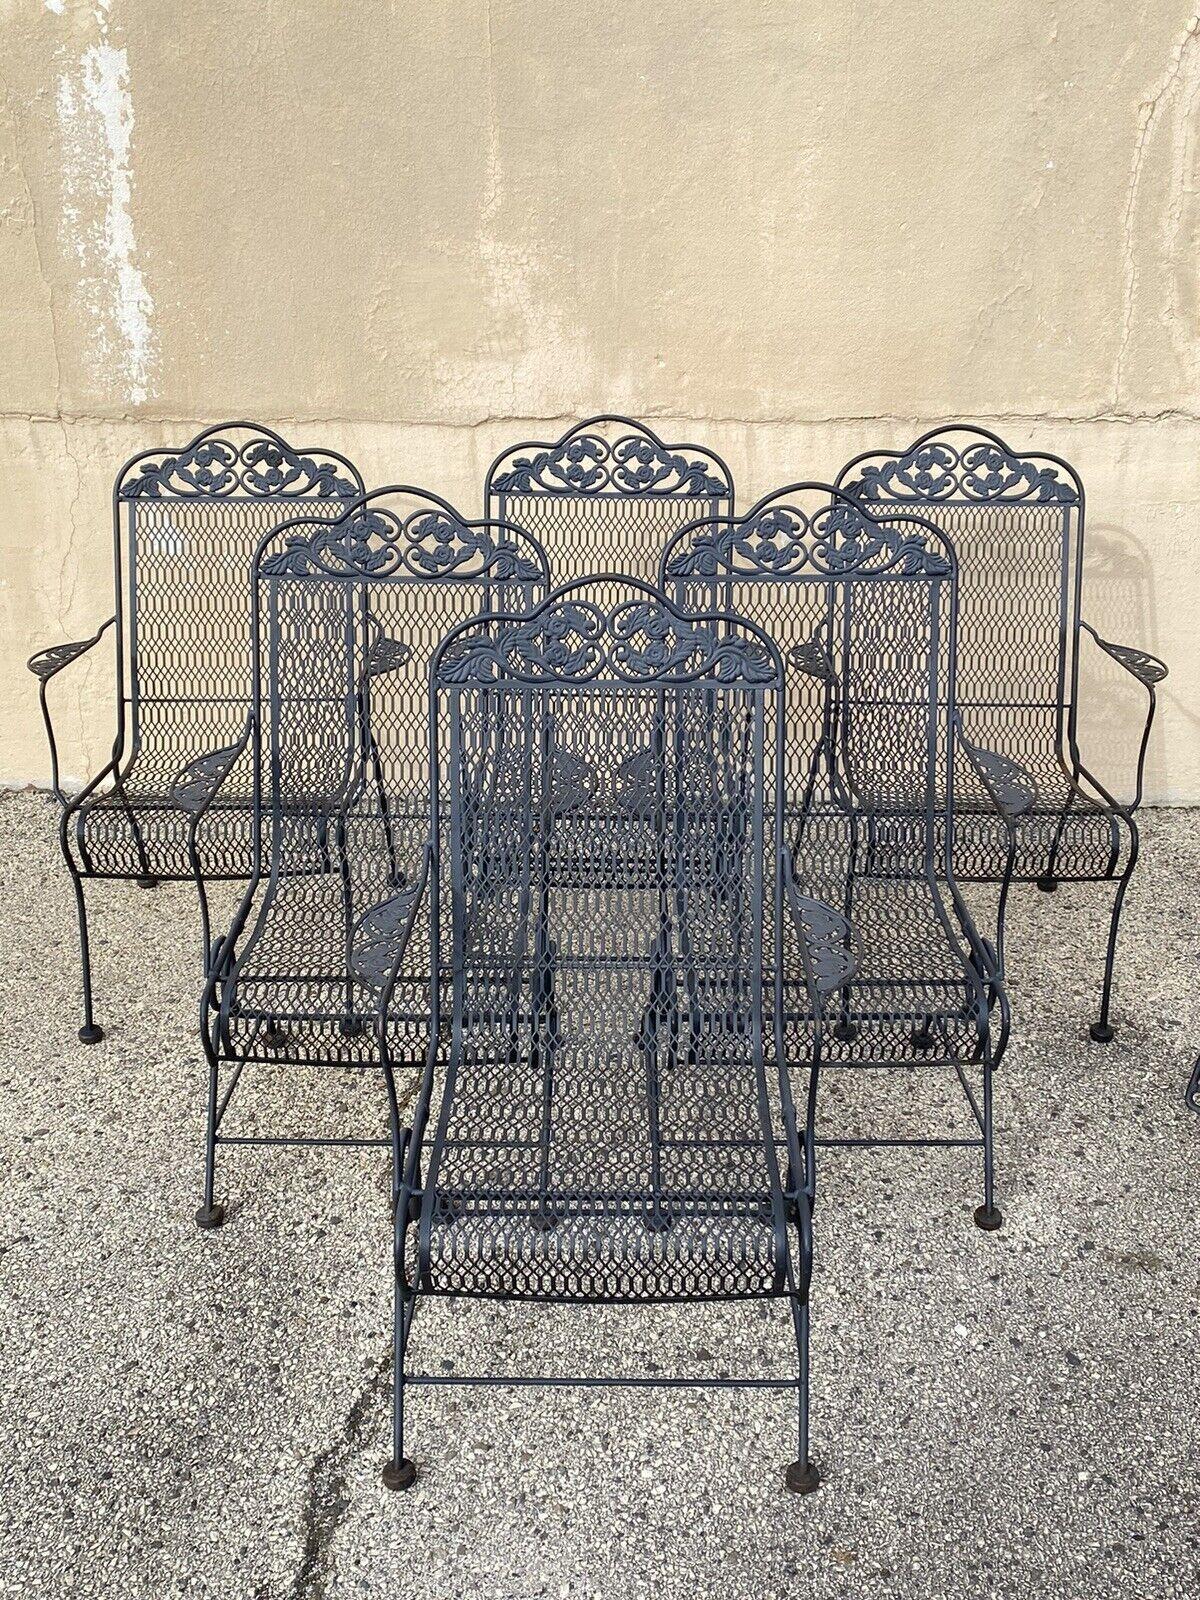 Vintage Wrought Iron Rose and Vine Pattern Garden Patio Chairs - 7 Pc Set For Sale 7